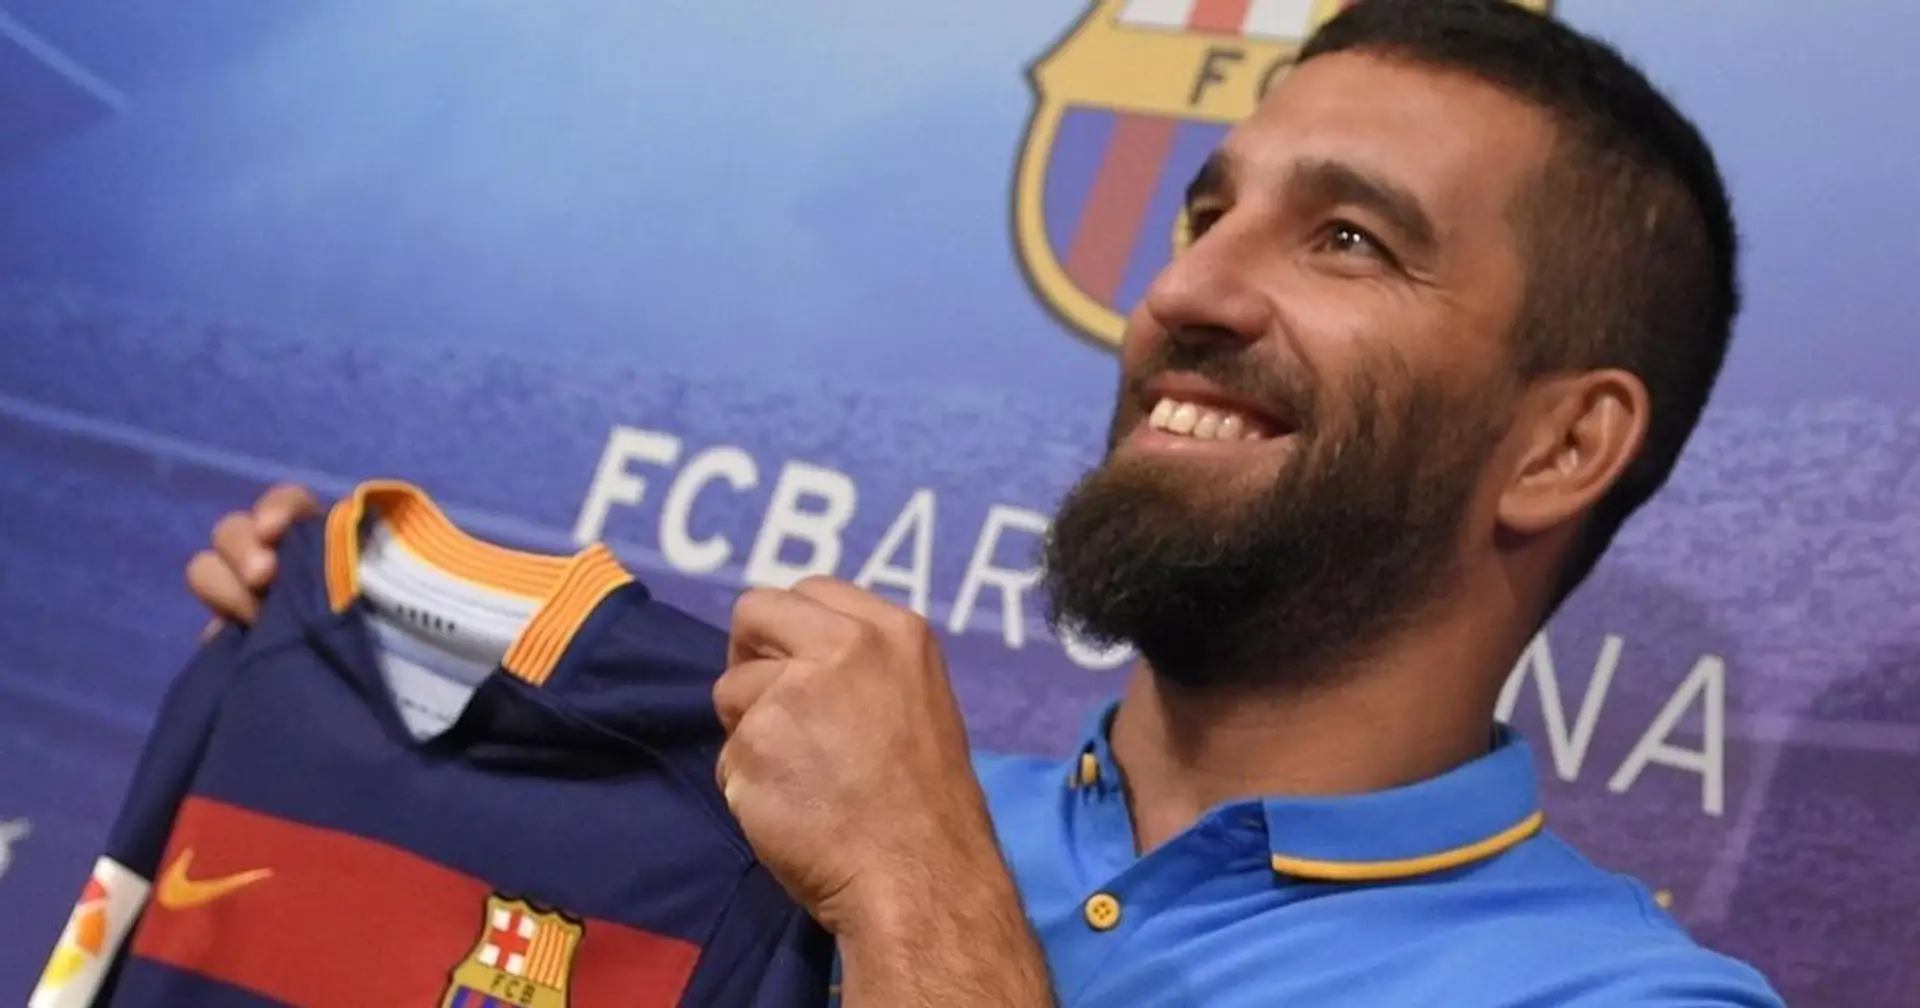 Arda Turan reveals he didn't know he was going to join Barca in 2015